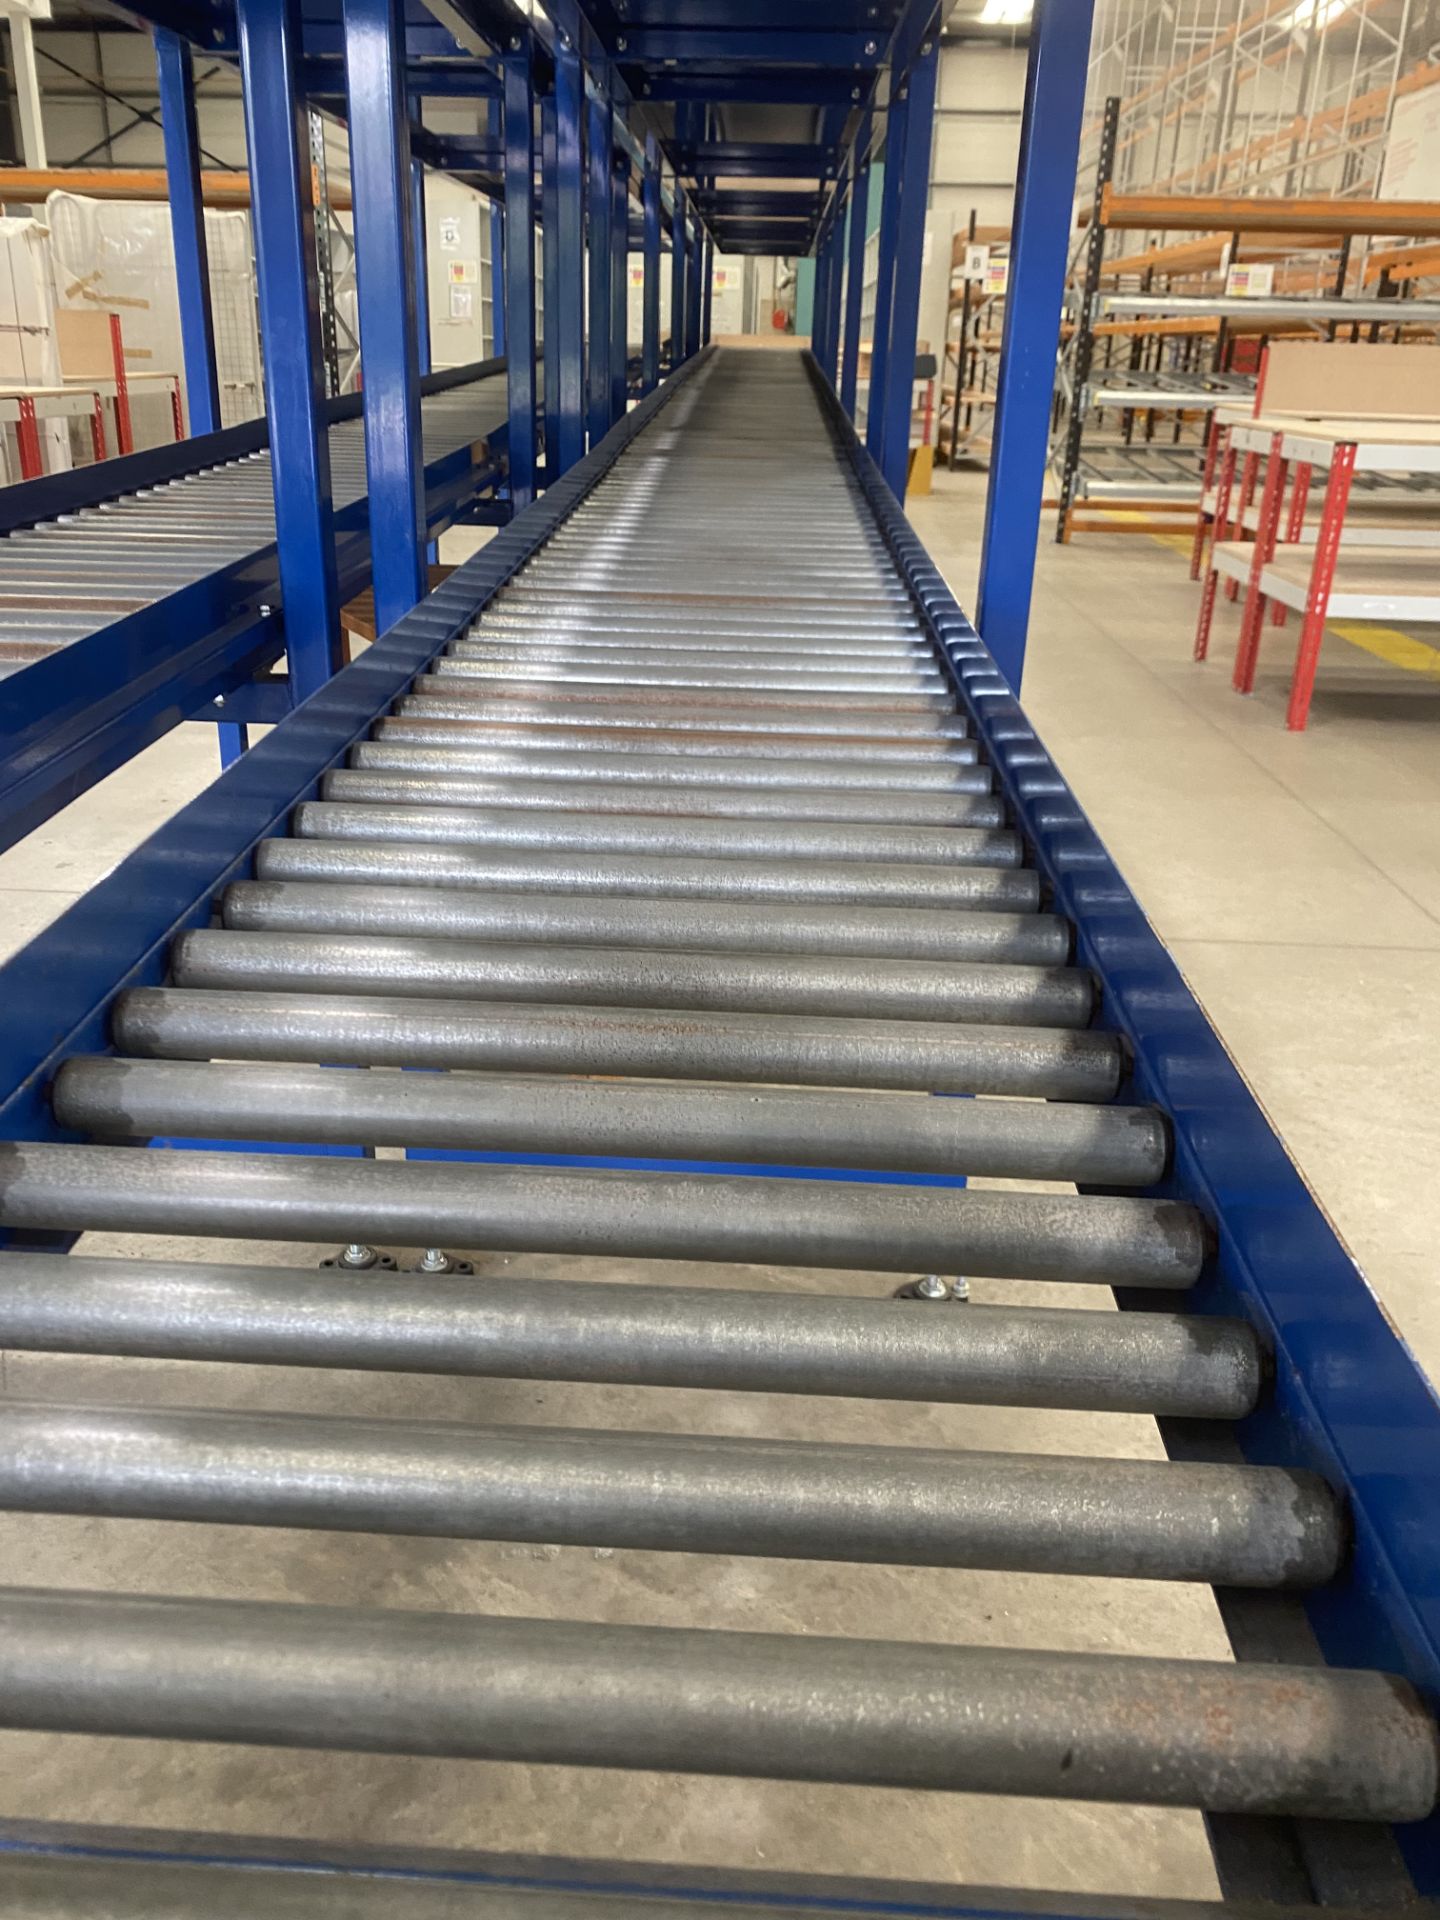 WAREHOUSE ROLLER CONVEYOR SYSTEM WITH TOP SHELF STORAGE 9.5M (3 SECTIONS OF 3M - CAN BE DISMANTLED) - Image 4 of 5